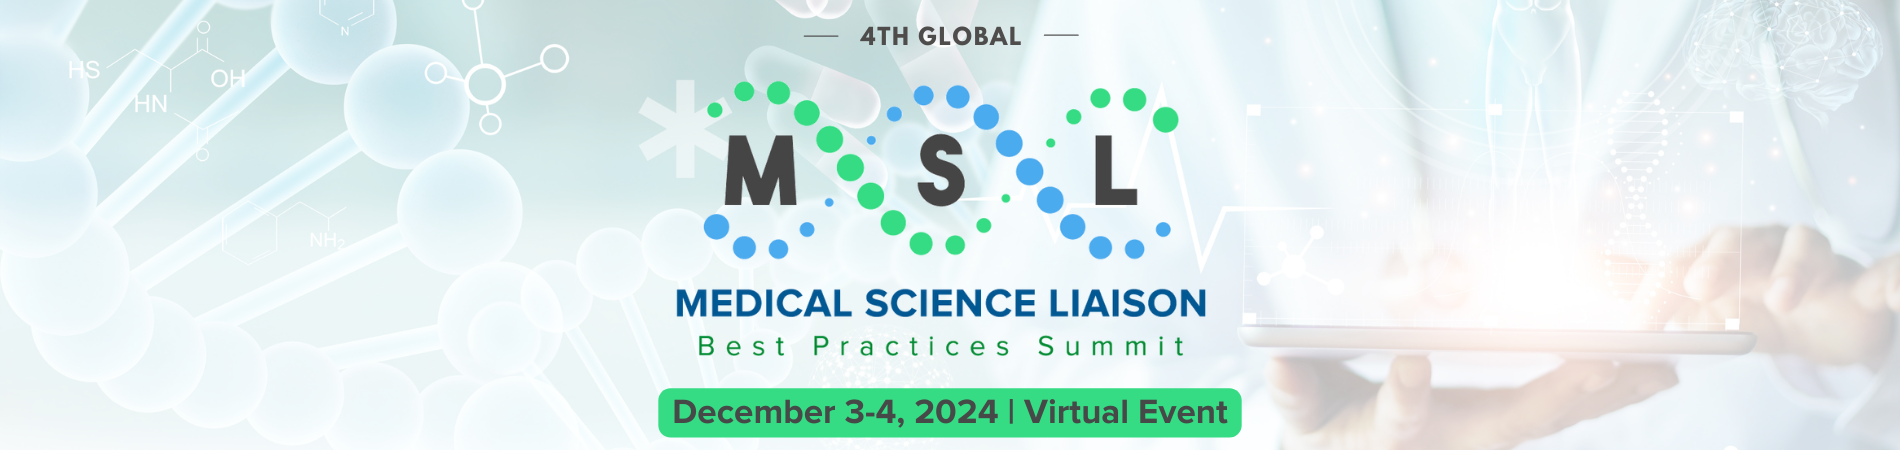 Hero banner of 4th MSL Best Practices Summit, December 3-4 | Virtual Event